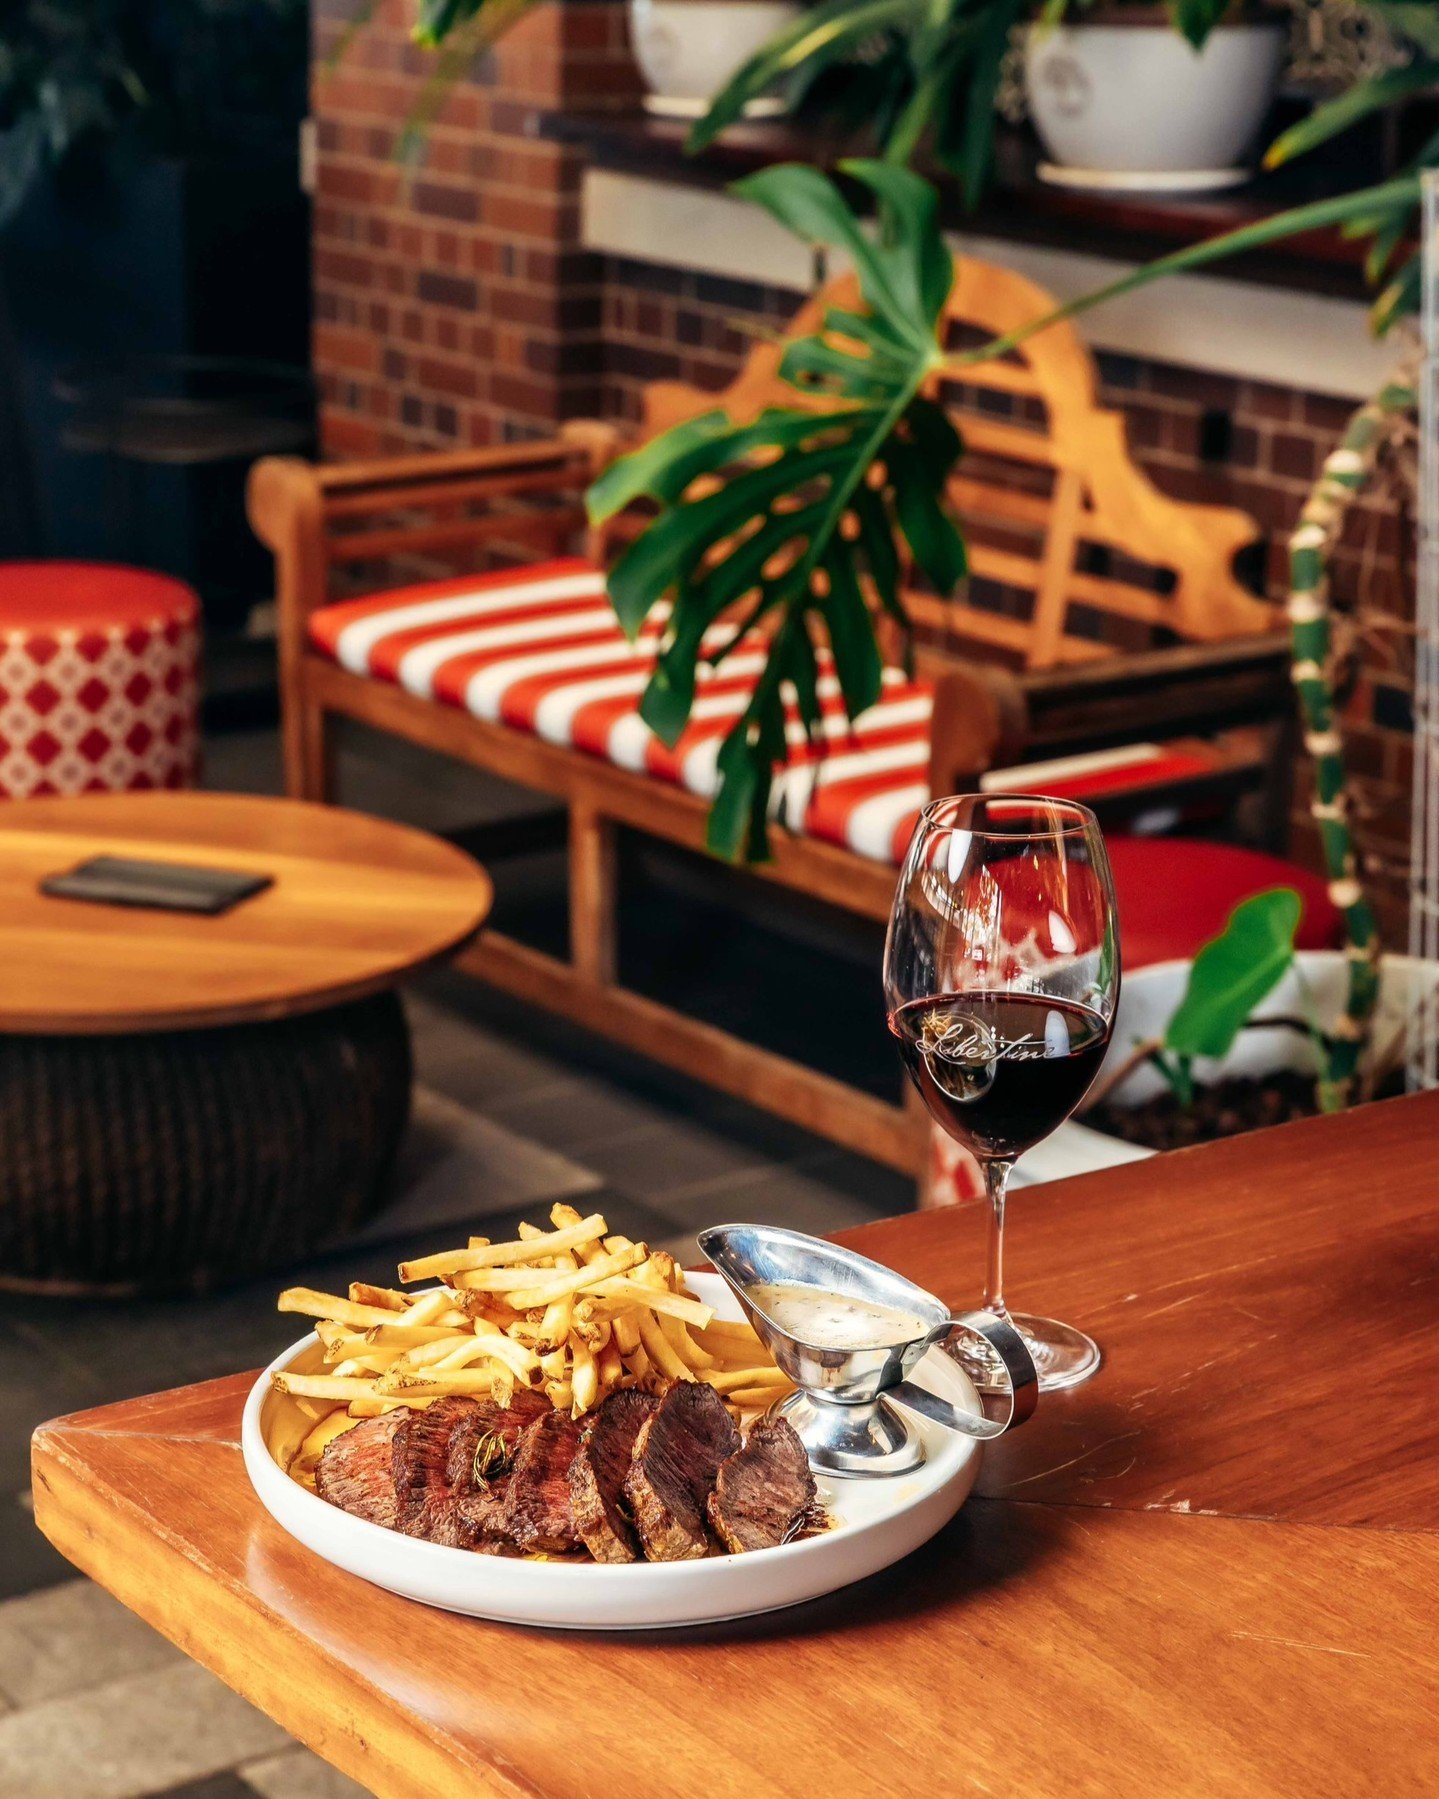 ⠀
It's a Steak Frites kinda Friday at Libertine! Indulge in our Steak Frites, available in 200g or 400g cuts featuring Sir Thomas Angus Flat Iron MB4-5, perfectly paired with our savoury Au Poivre Vert Sauce✨⠀
⠀
Call (07) 3367 3353 or book online at 